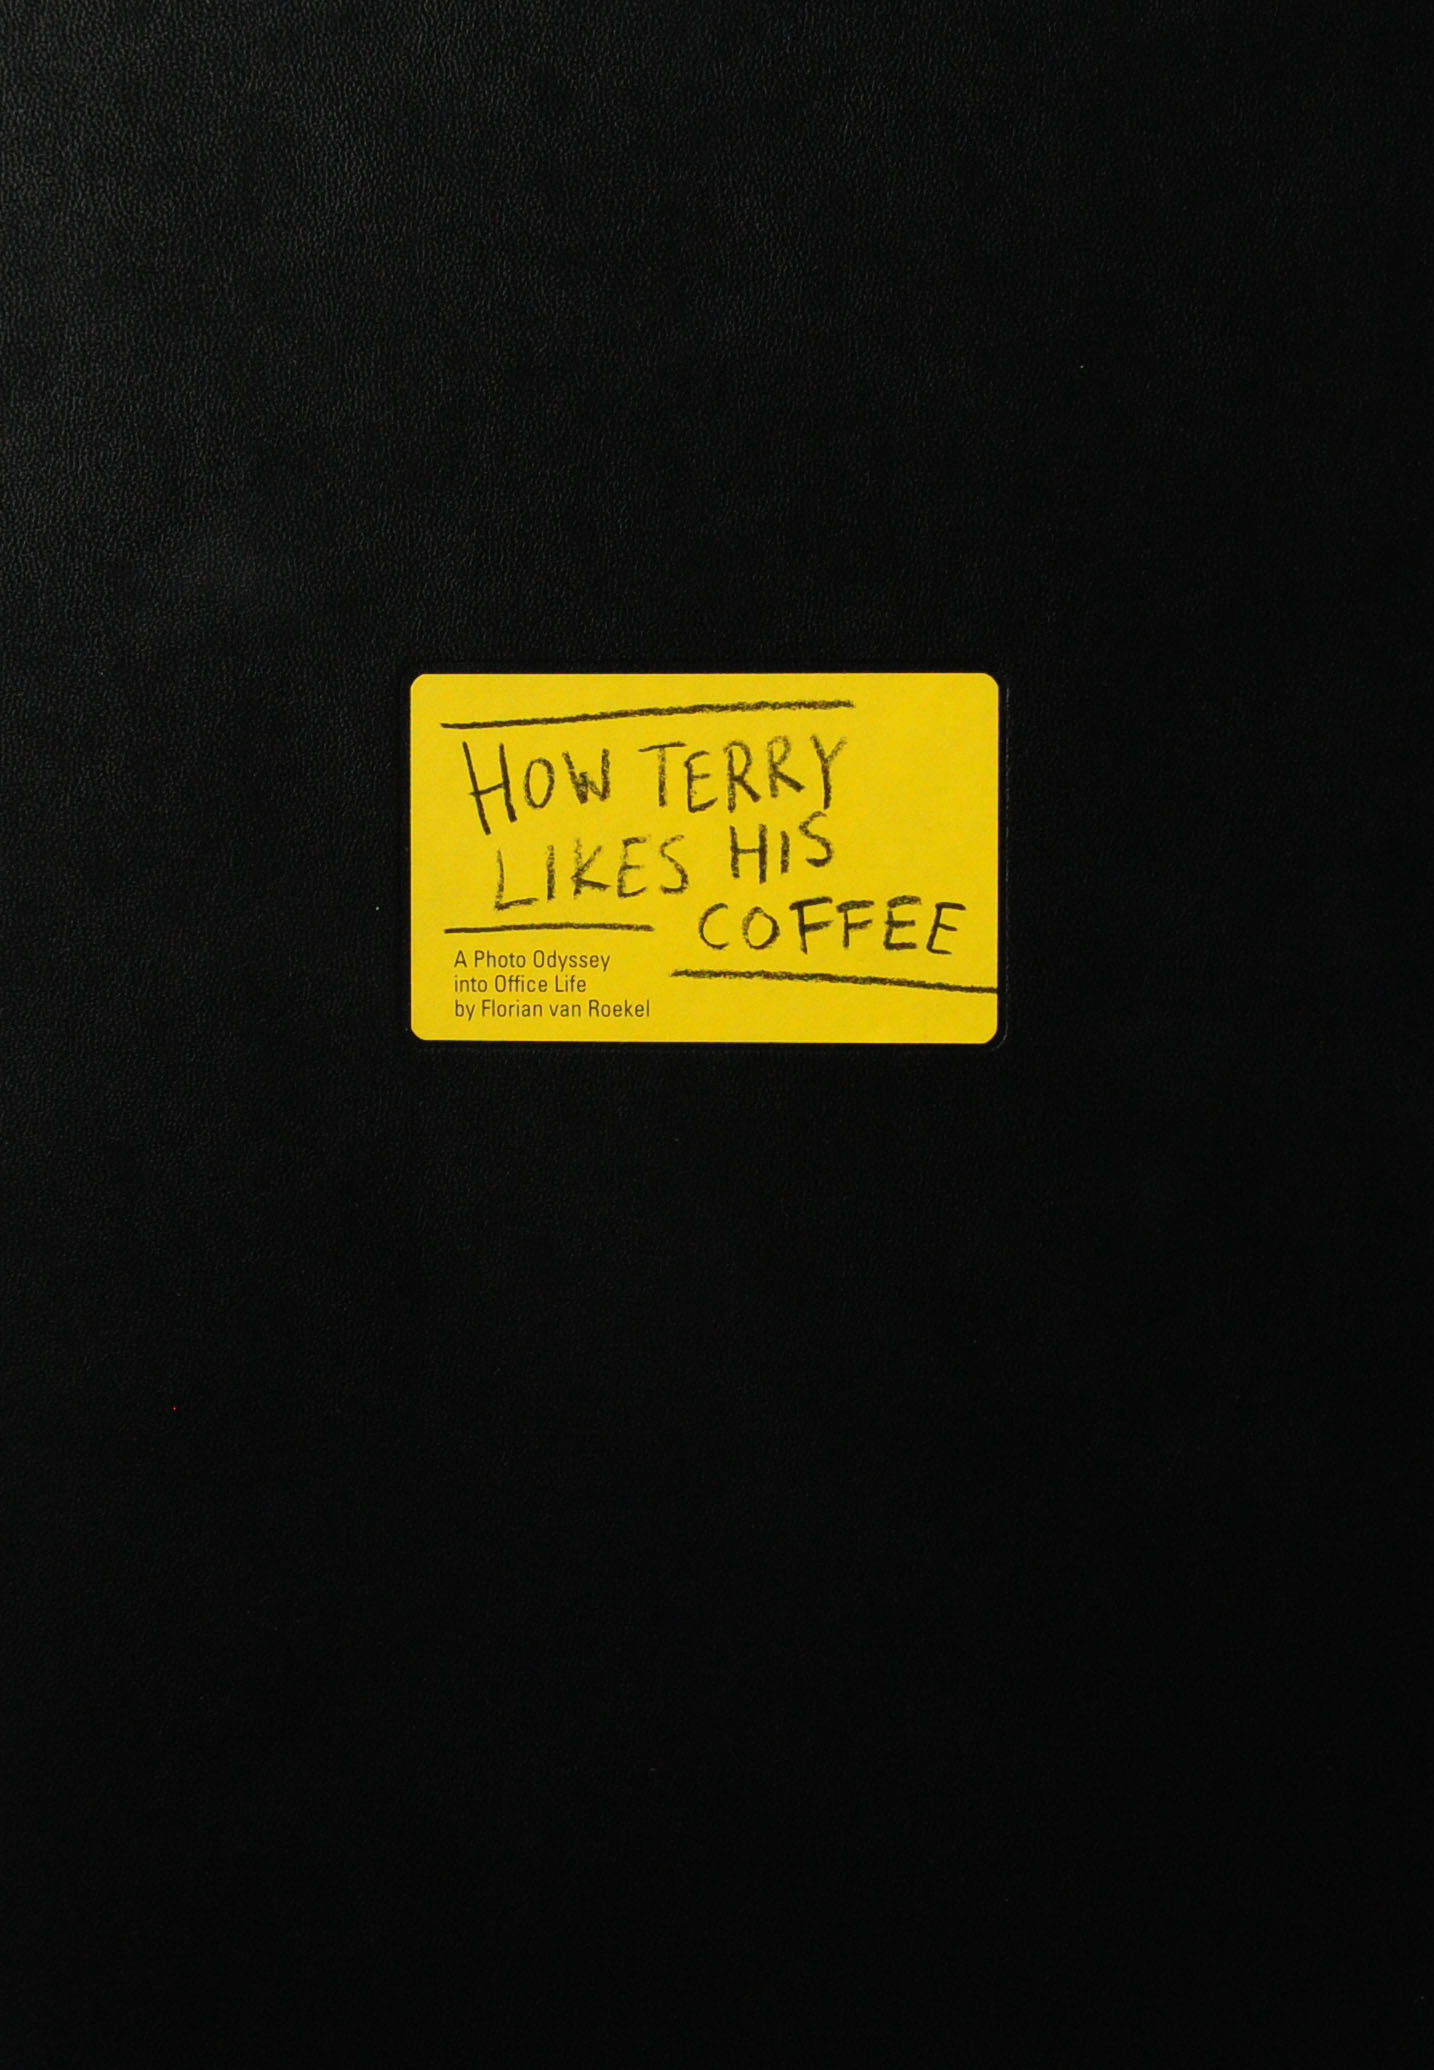 How Terry Likes His Coffee: A Photo Odyssey into Office Life Florian van Roekel